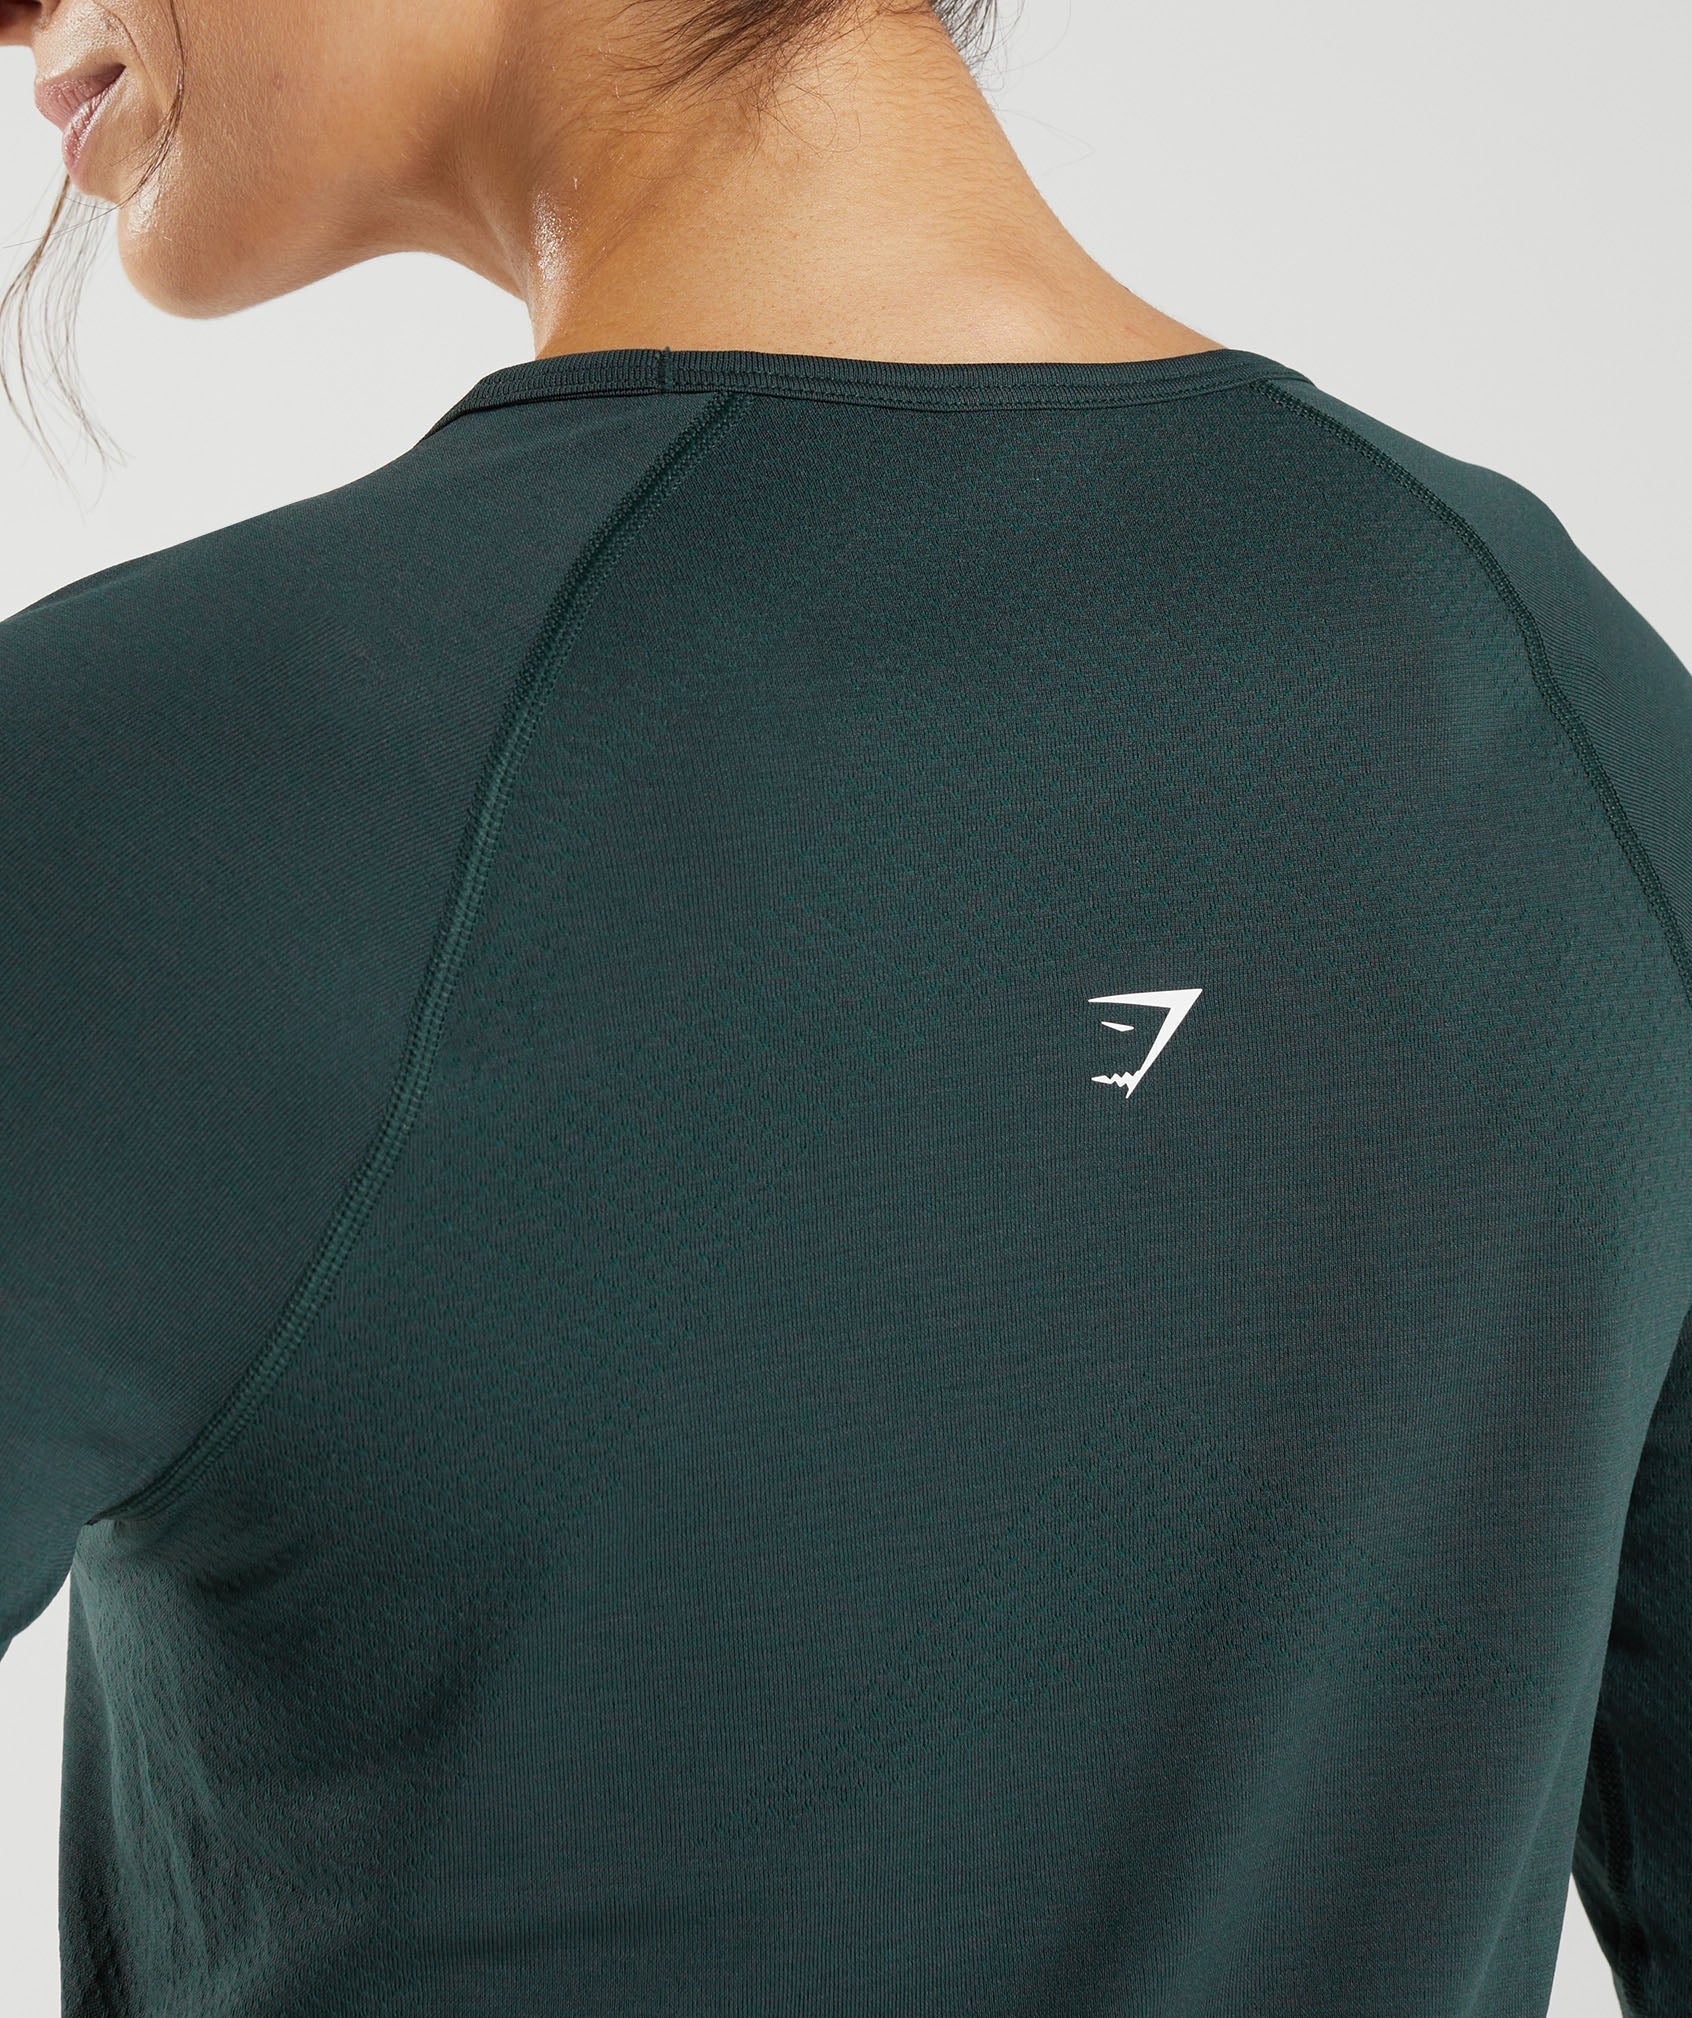 Gymshark Vital seamless 2.0 light long sleeve top Green Size L - $17 (57%  Off Retail) - From Sofia